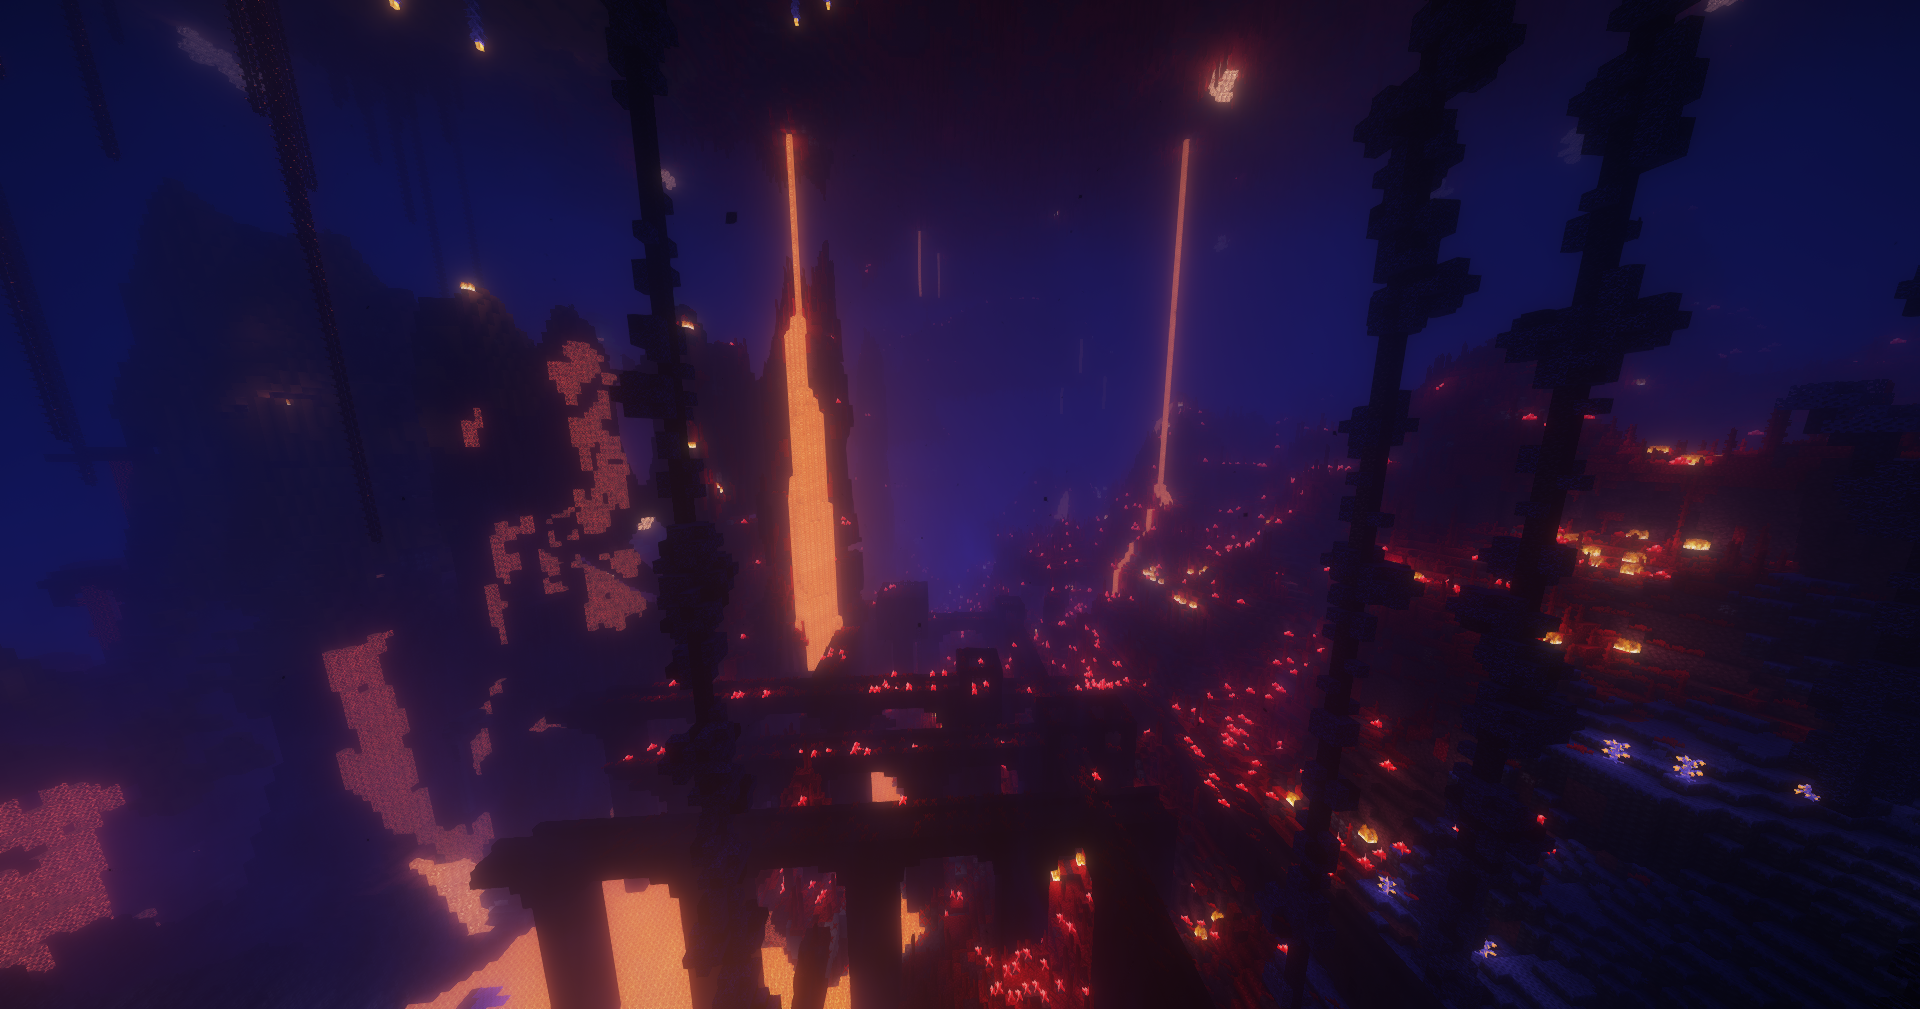 Nether 3